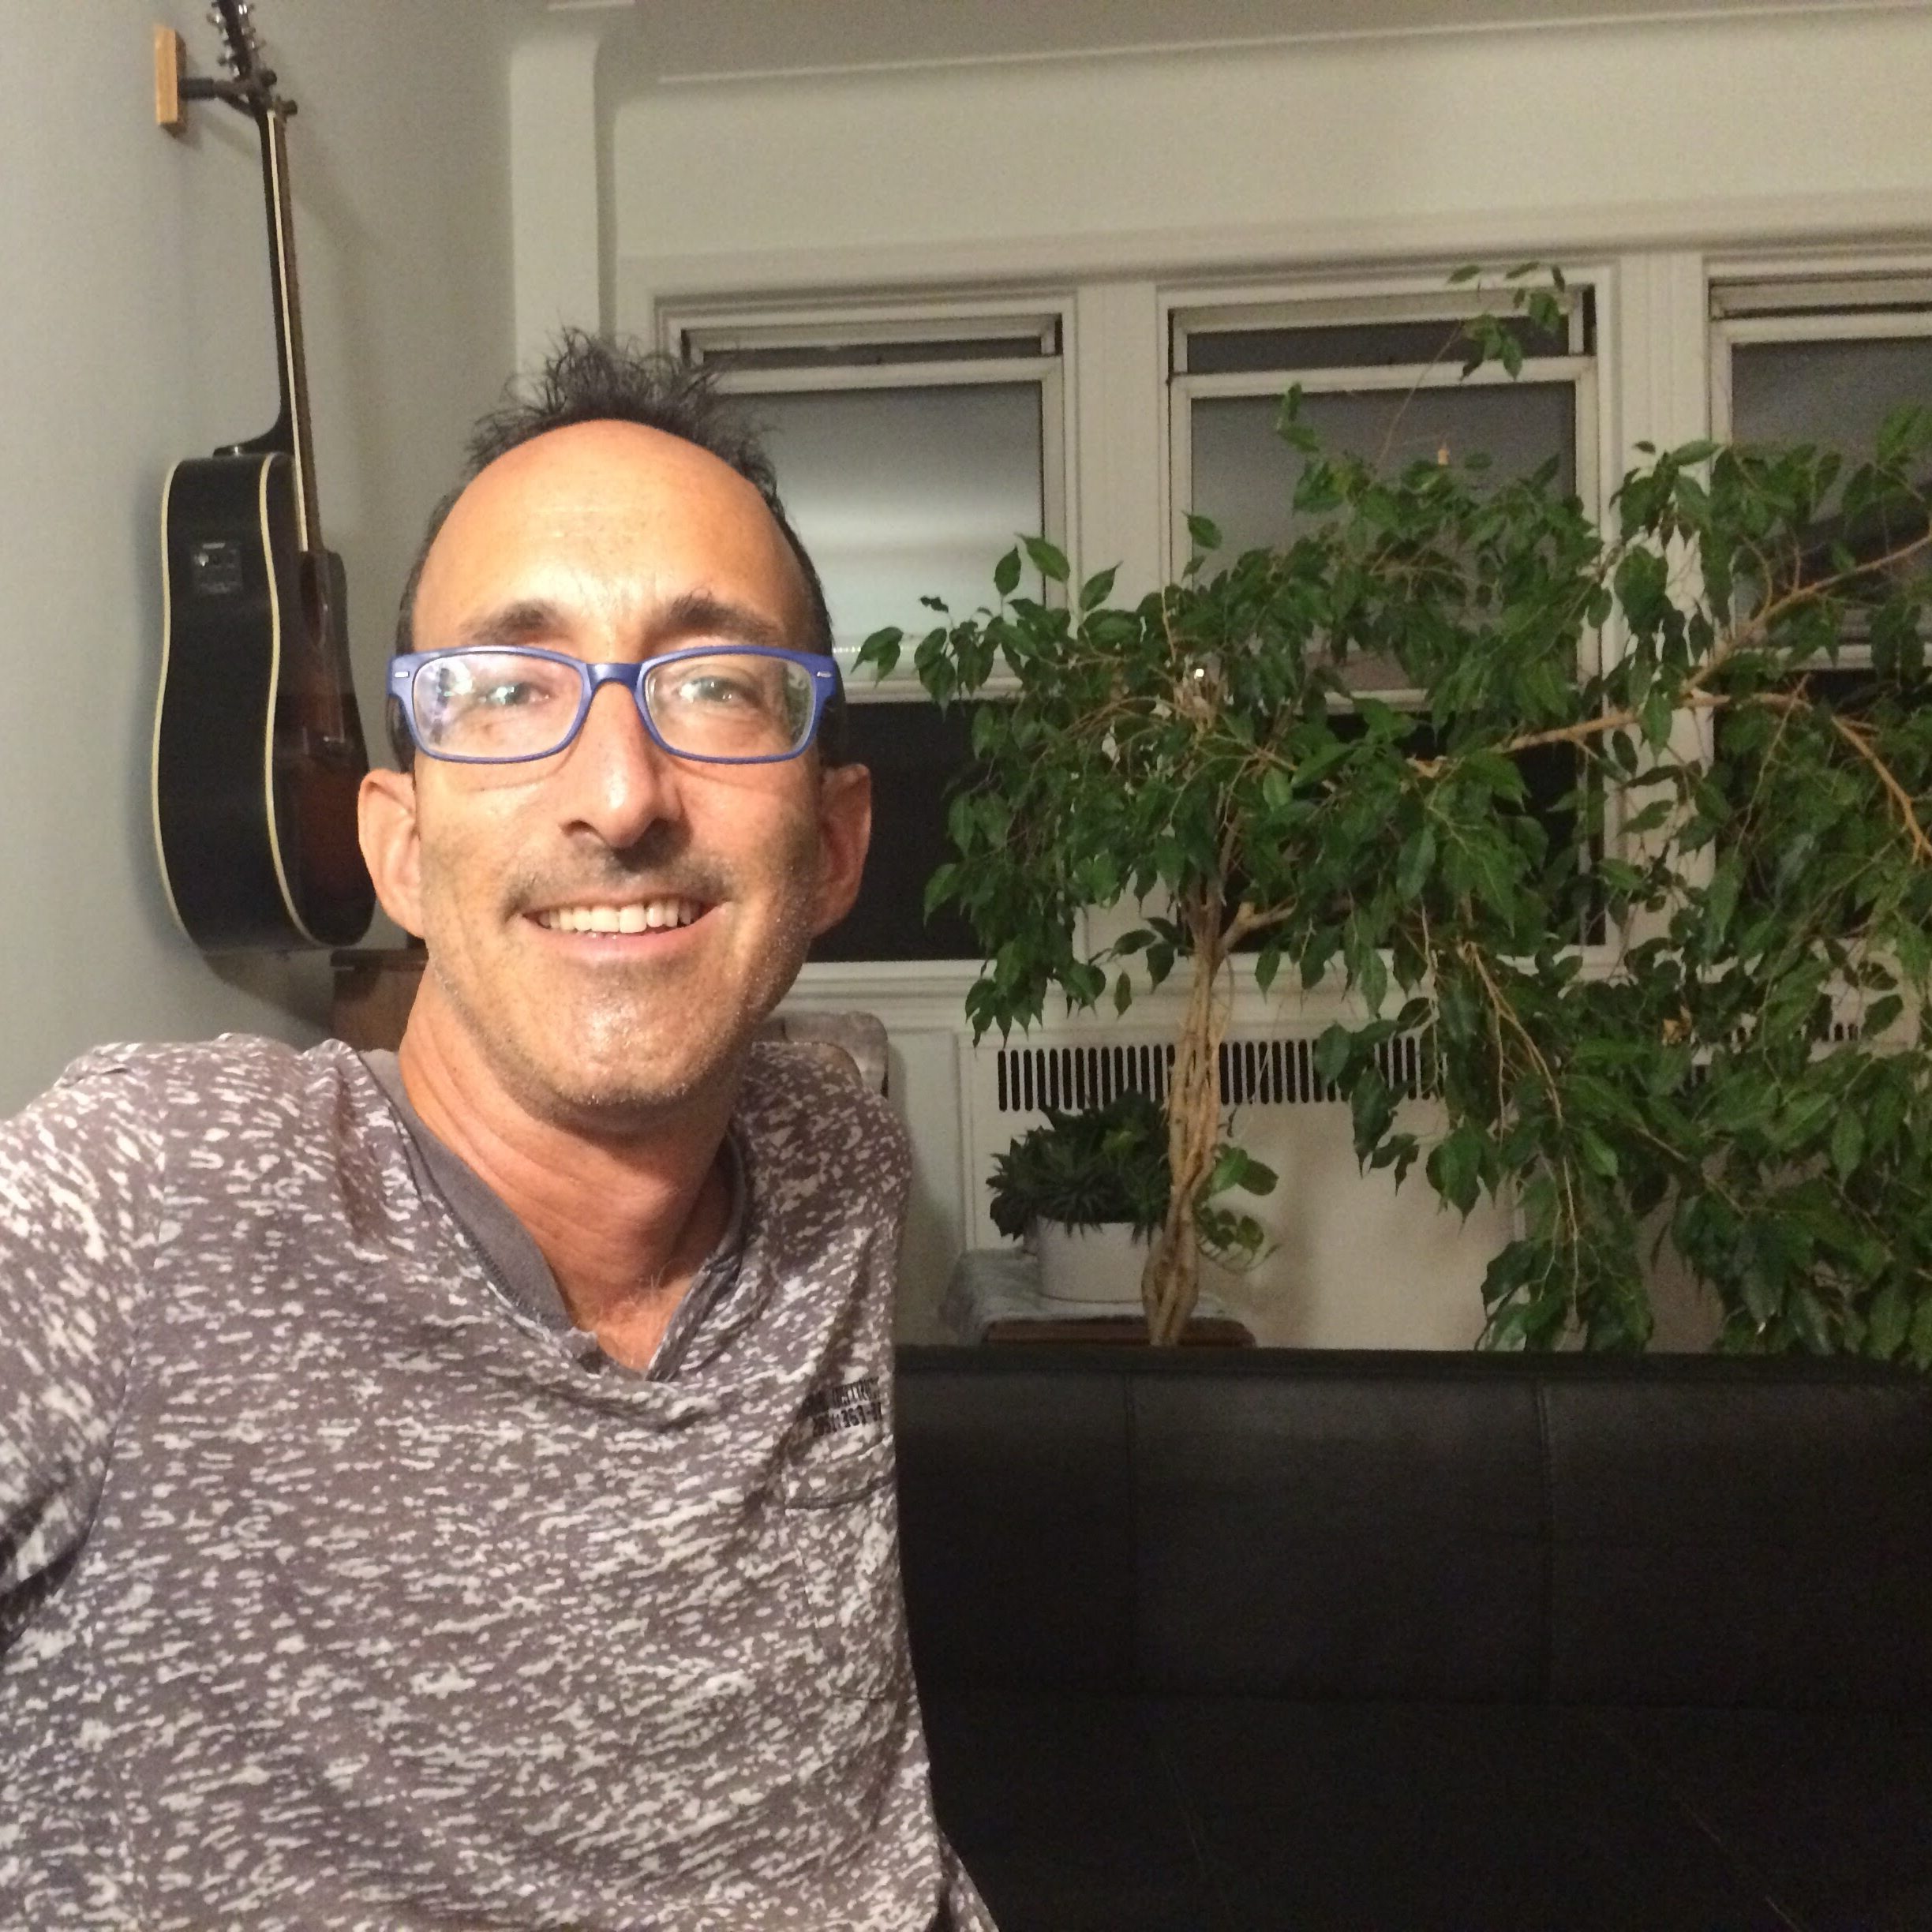 Author and drummer, David Rothman. David is a white man with short dark hair and glasses and a narrow, smiling face. He wears a gray t-shirt and glasses. 